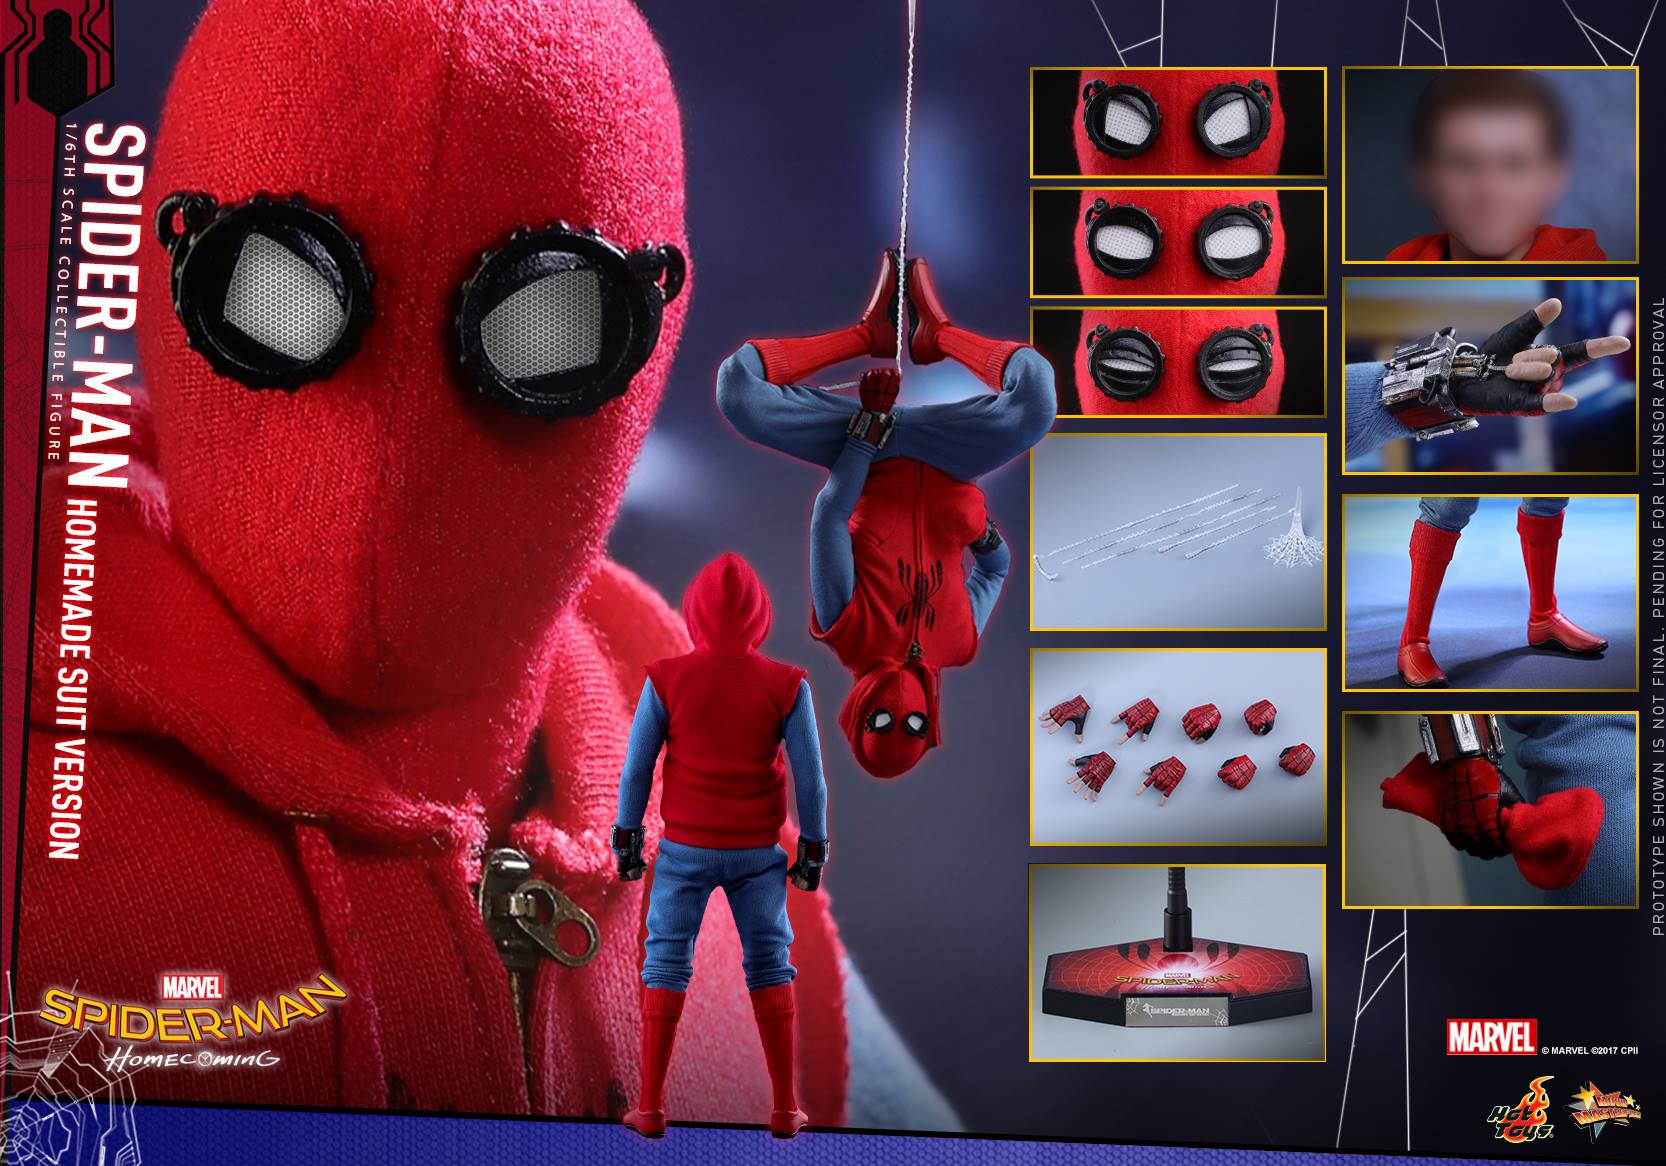 Hot Toys Reveals Their SPIDER-MAN: HOMECOMING Action Figure of Spider-Man  in His Homemade Suit — GeekTyrant